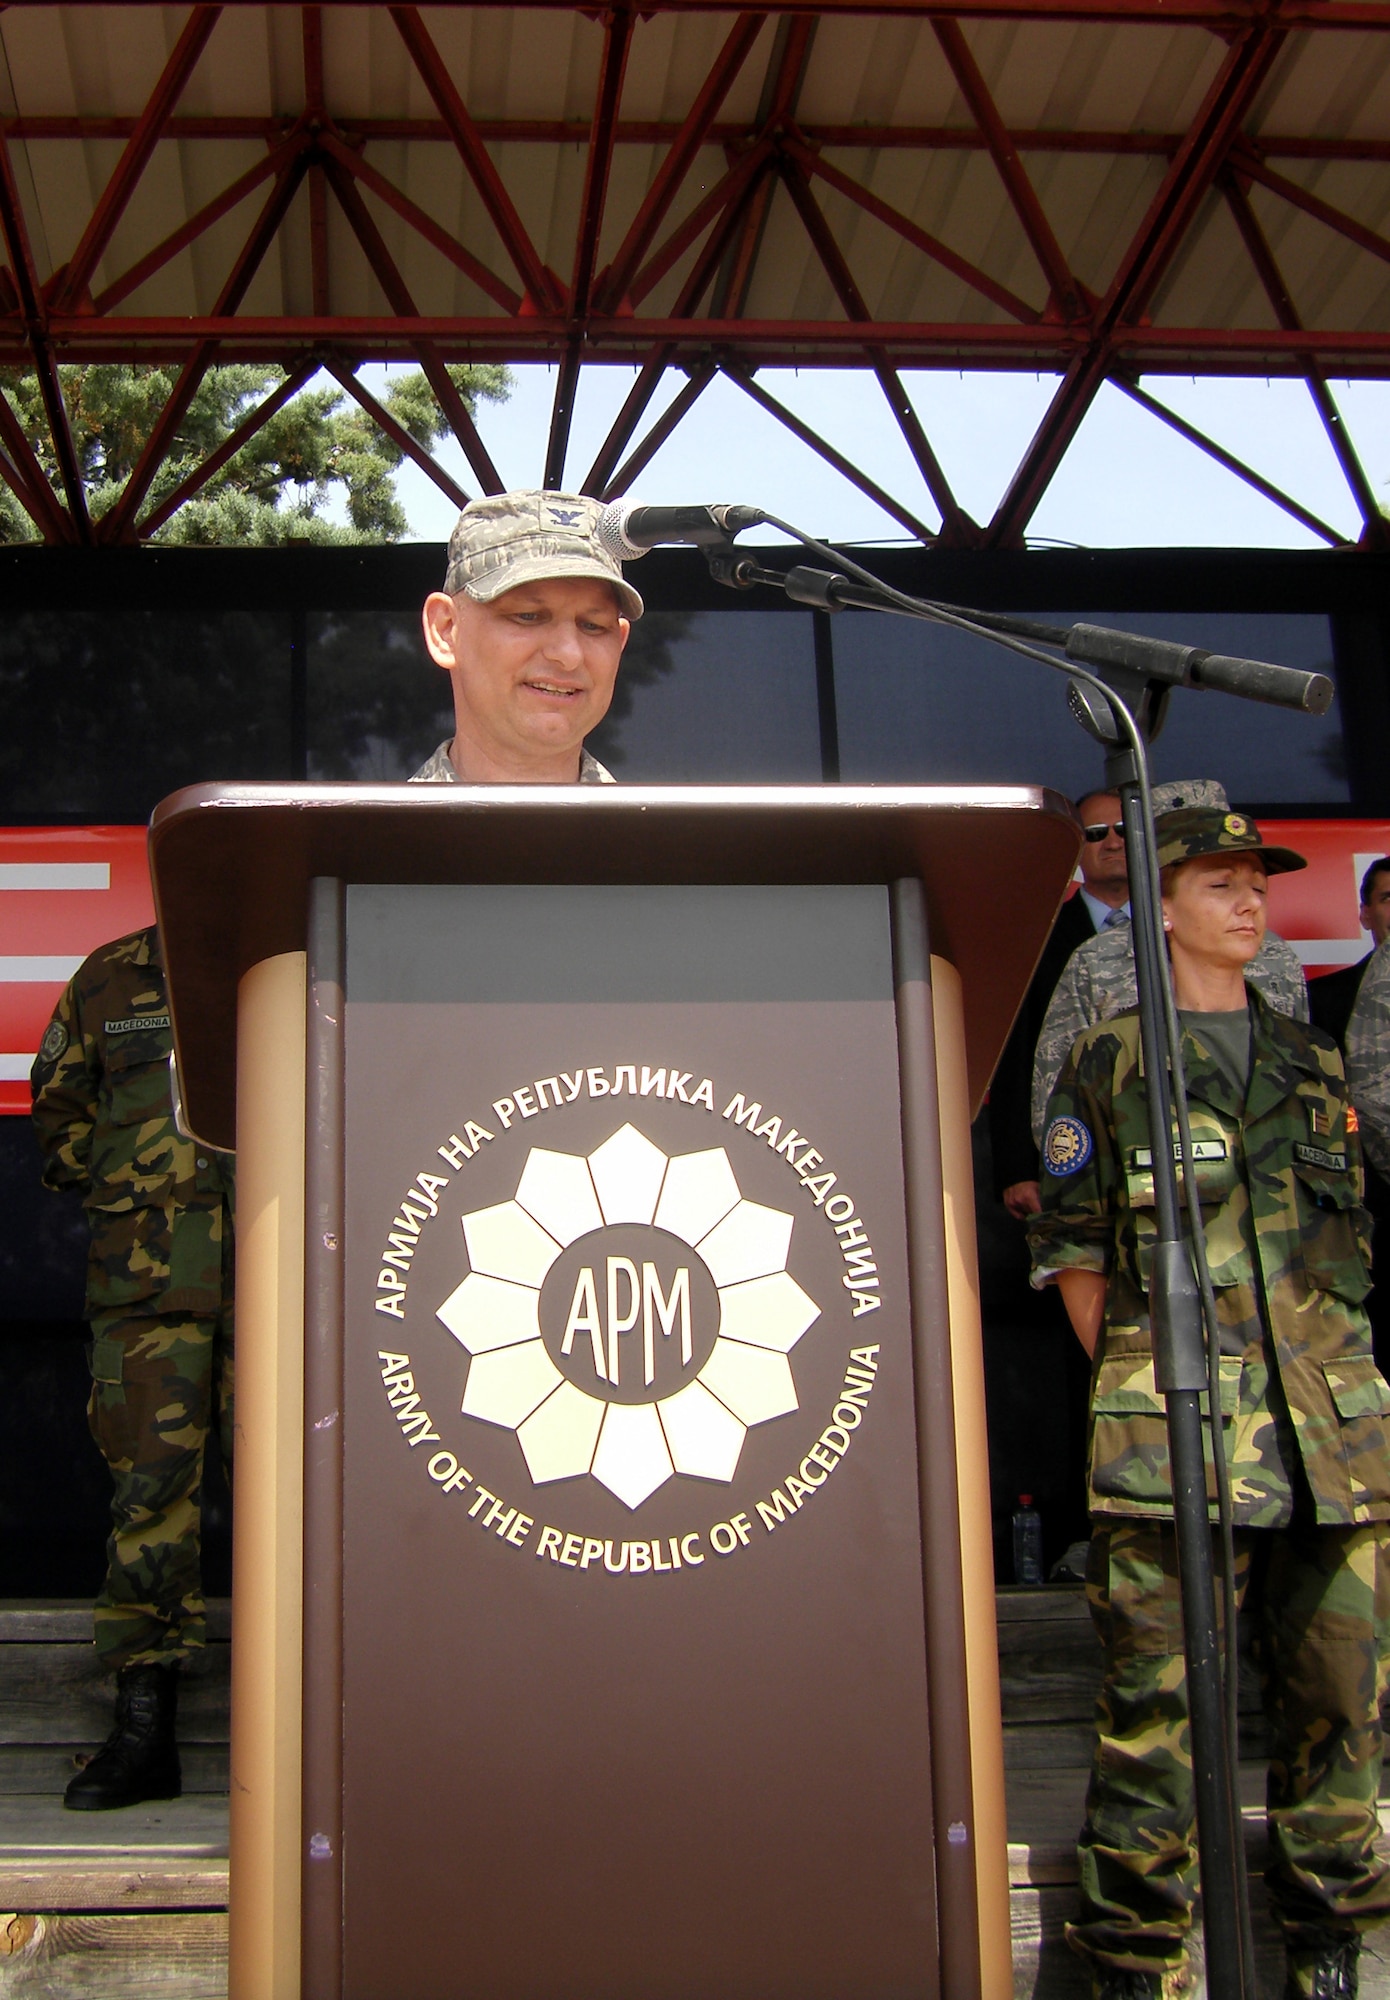 CAMP PEPELISHTE, Macedonia – Col. Charles Tedder, the American co-director for Medical Training Exercise in Central and Eastern Europe, gives his opening remarks during the MEDCEUR 2011 opening ceremony here June 6. The countries participating in this year’s MEDCEUR are Macedonia, Montenegro, Bosnia and Herzegovina, Serbia, Slovenia, Norway and the United States. MEDCEUR is a Partnership for Peace and Chairman of the Joint Chiefs of Staff-sponsored regional and multilateral exercise in Central and Eastern Europe designed to provide medical training and operational experience in a deployed environment.  (U.S. Air Force photo/Master Sgt. Kelley J. Stewart)